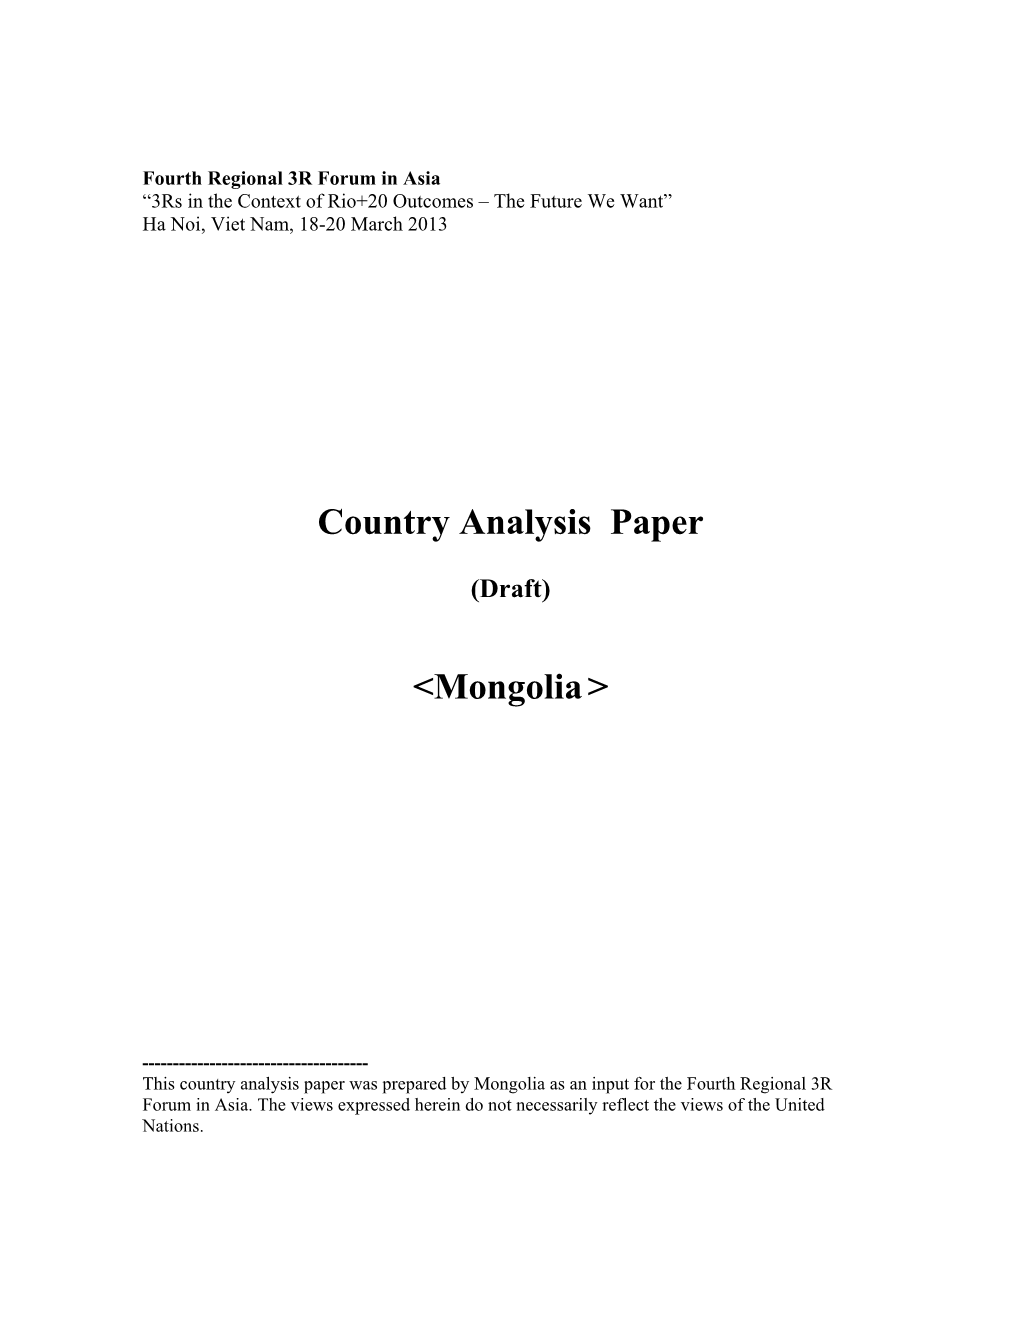 Country Analysis Paper &lt;Mongolia&gt;